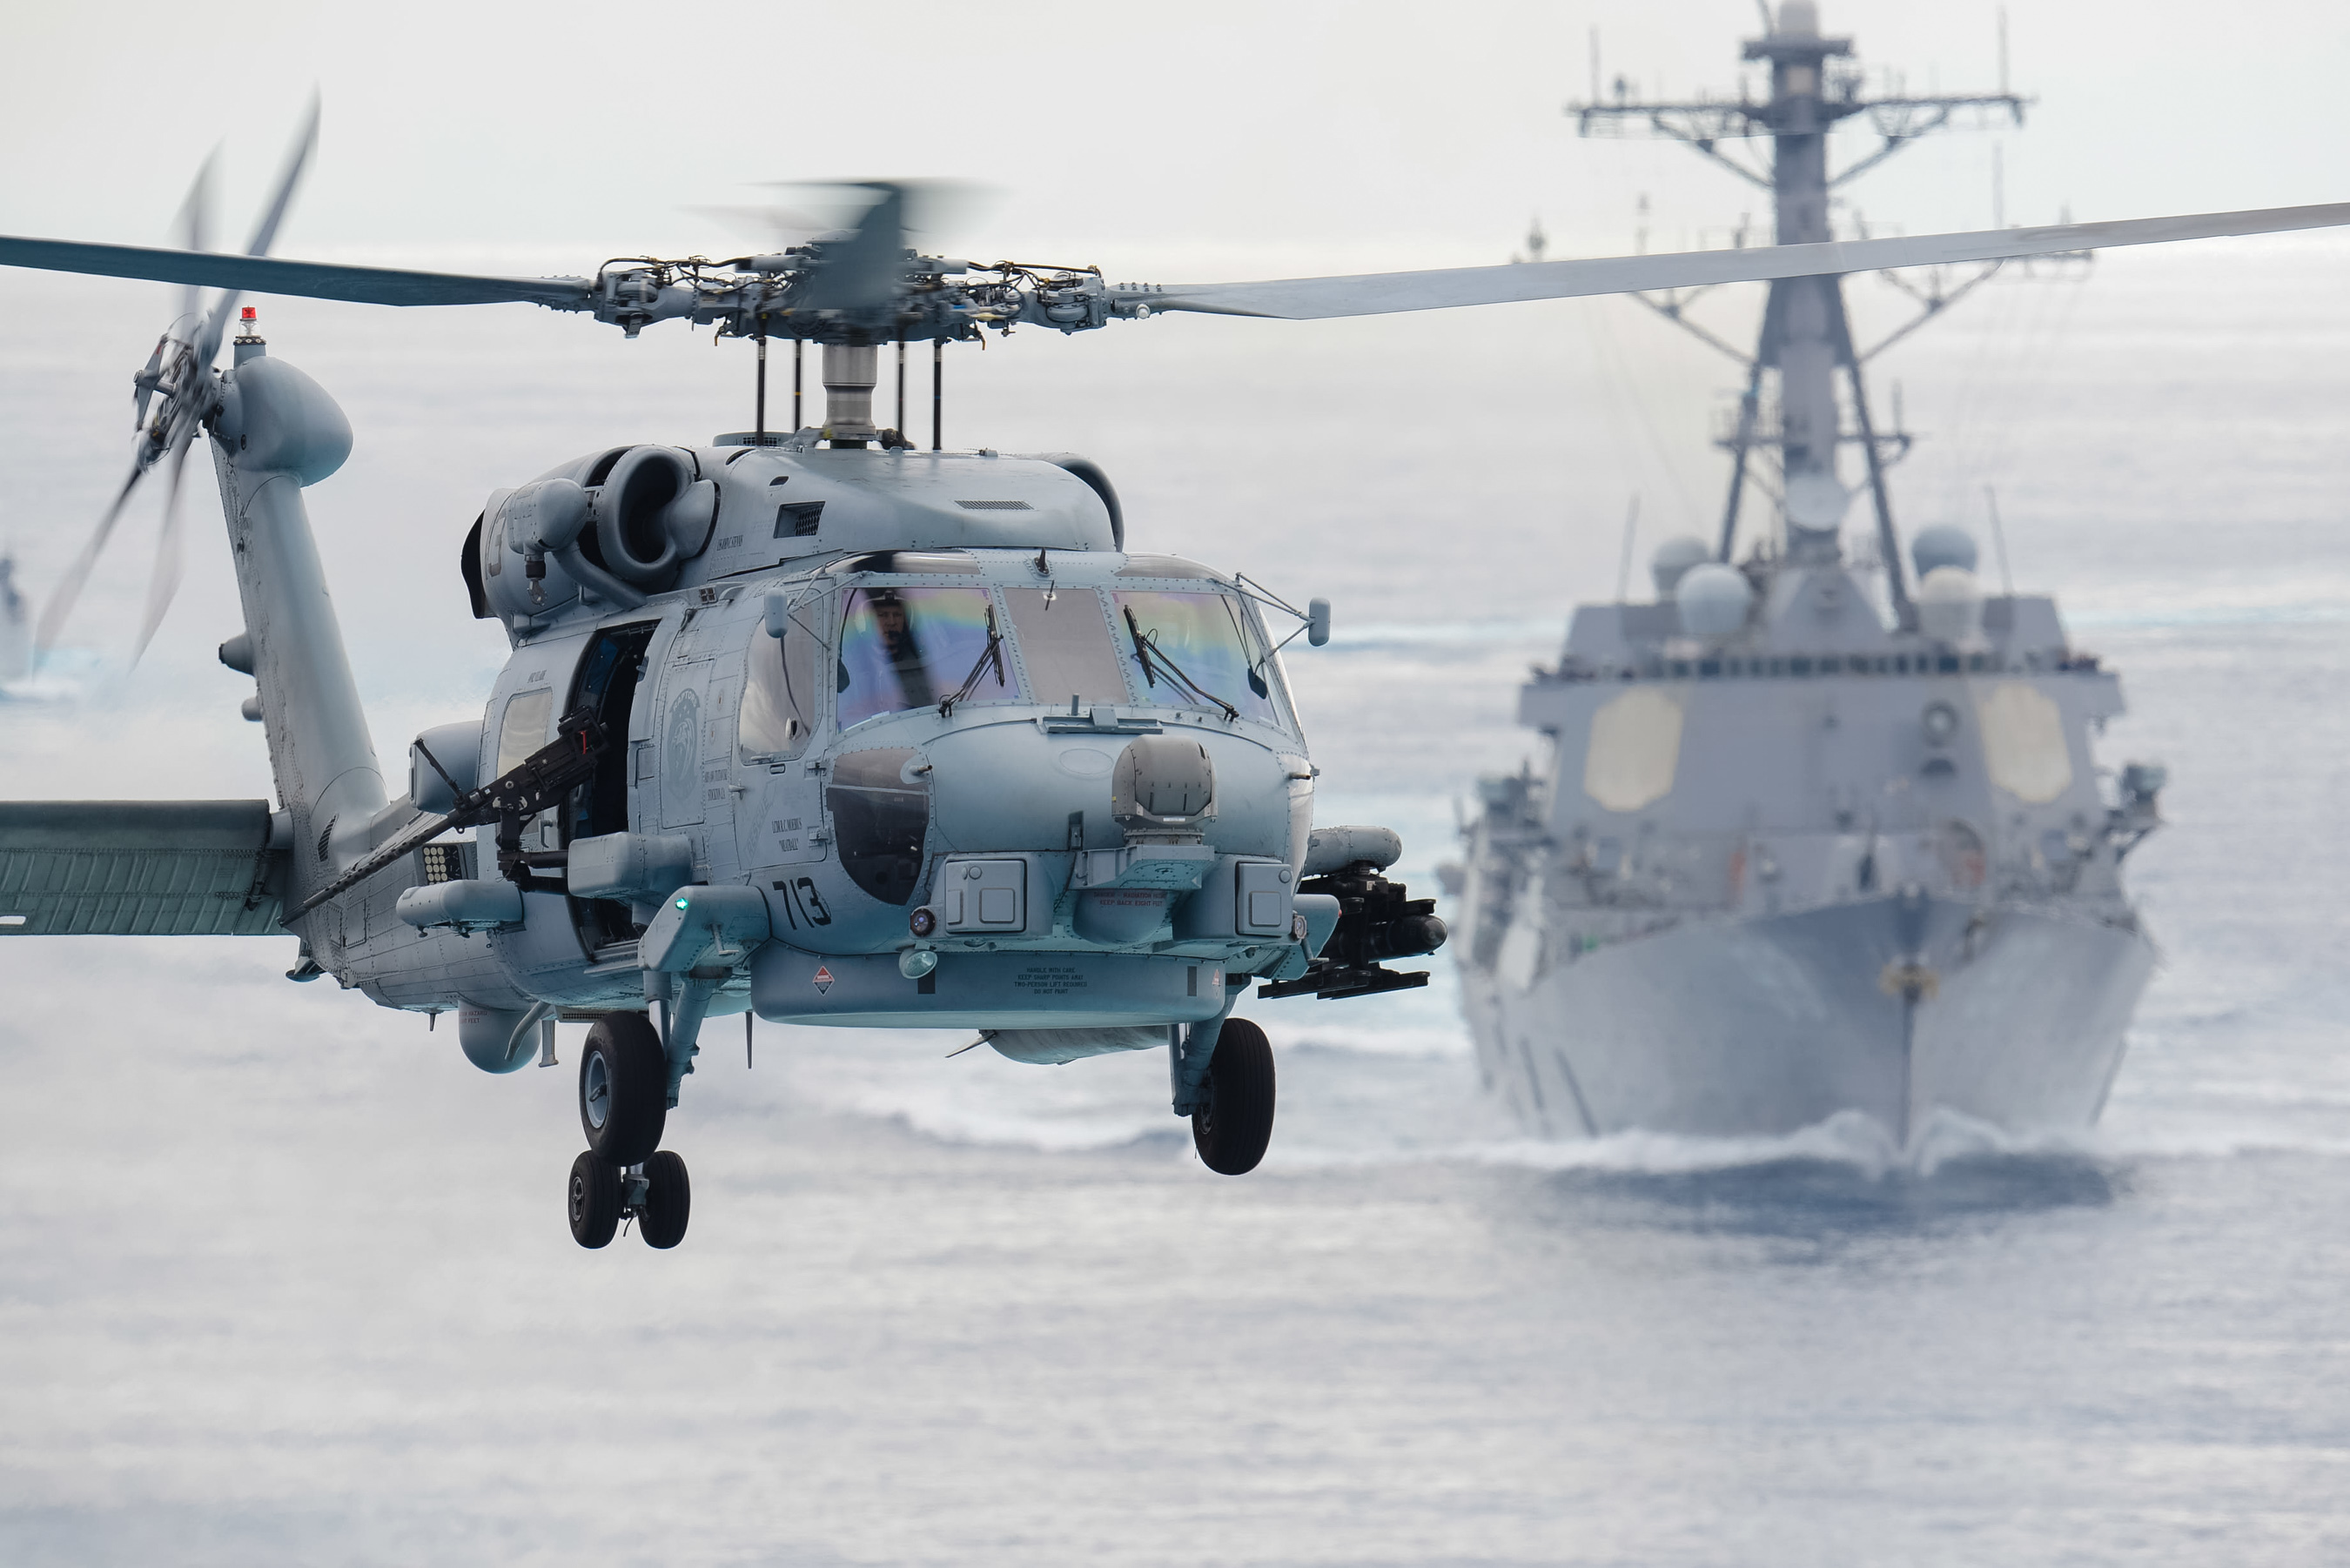 Sikorsky MH-60R Seahawk helicopter